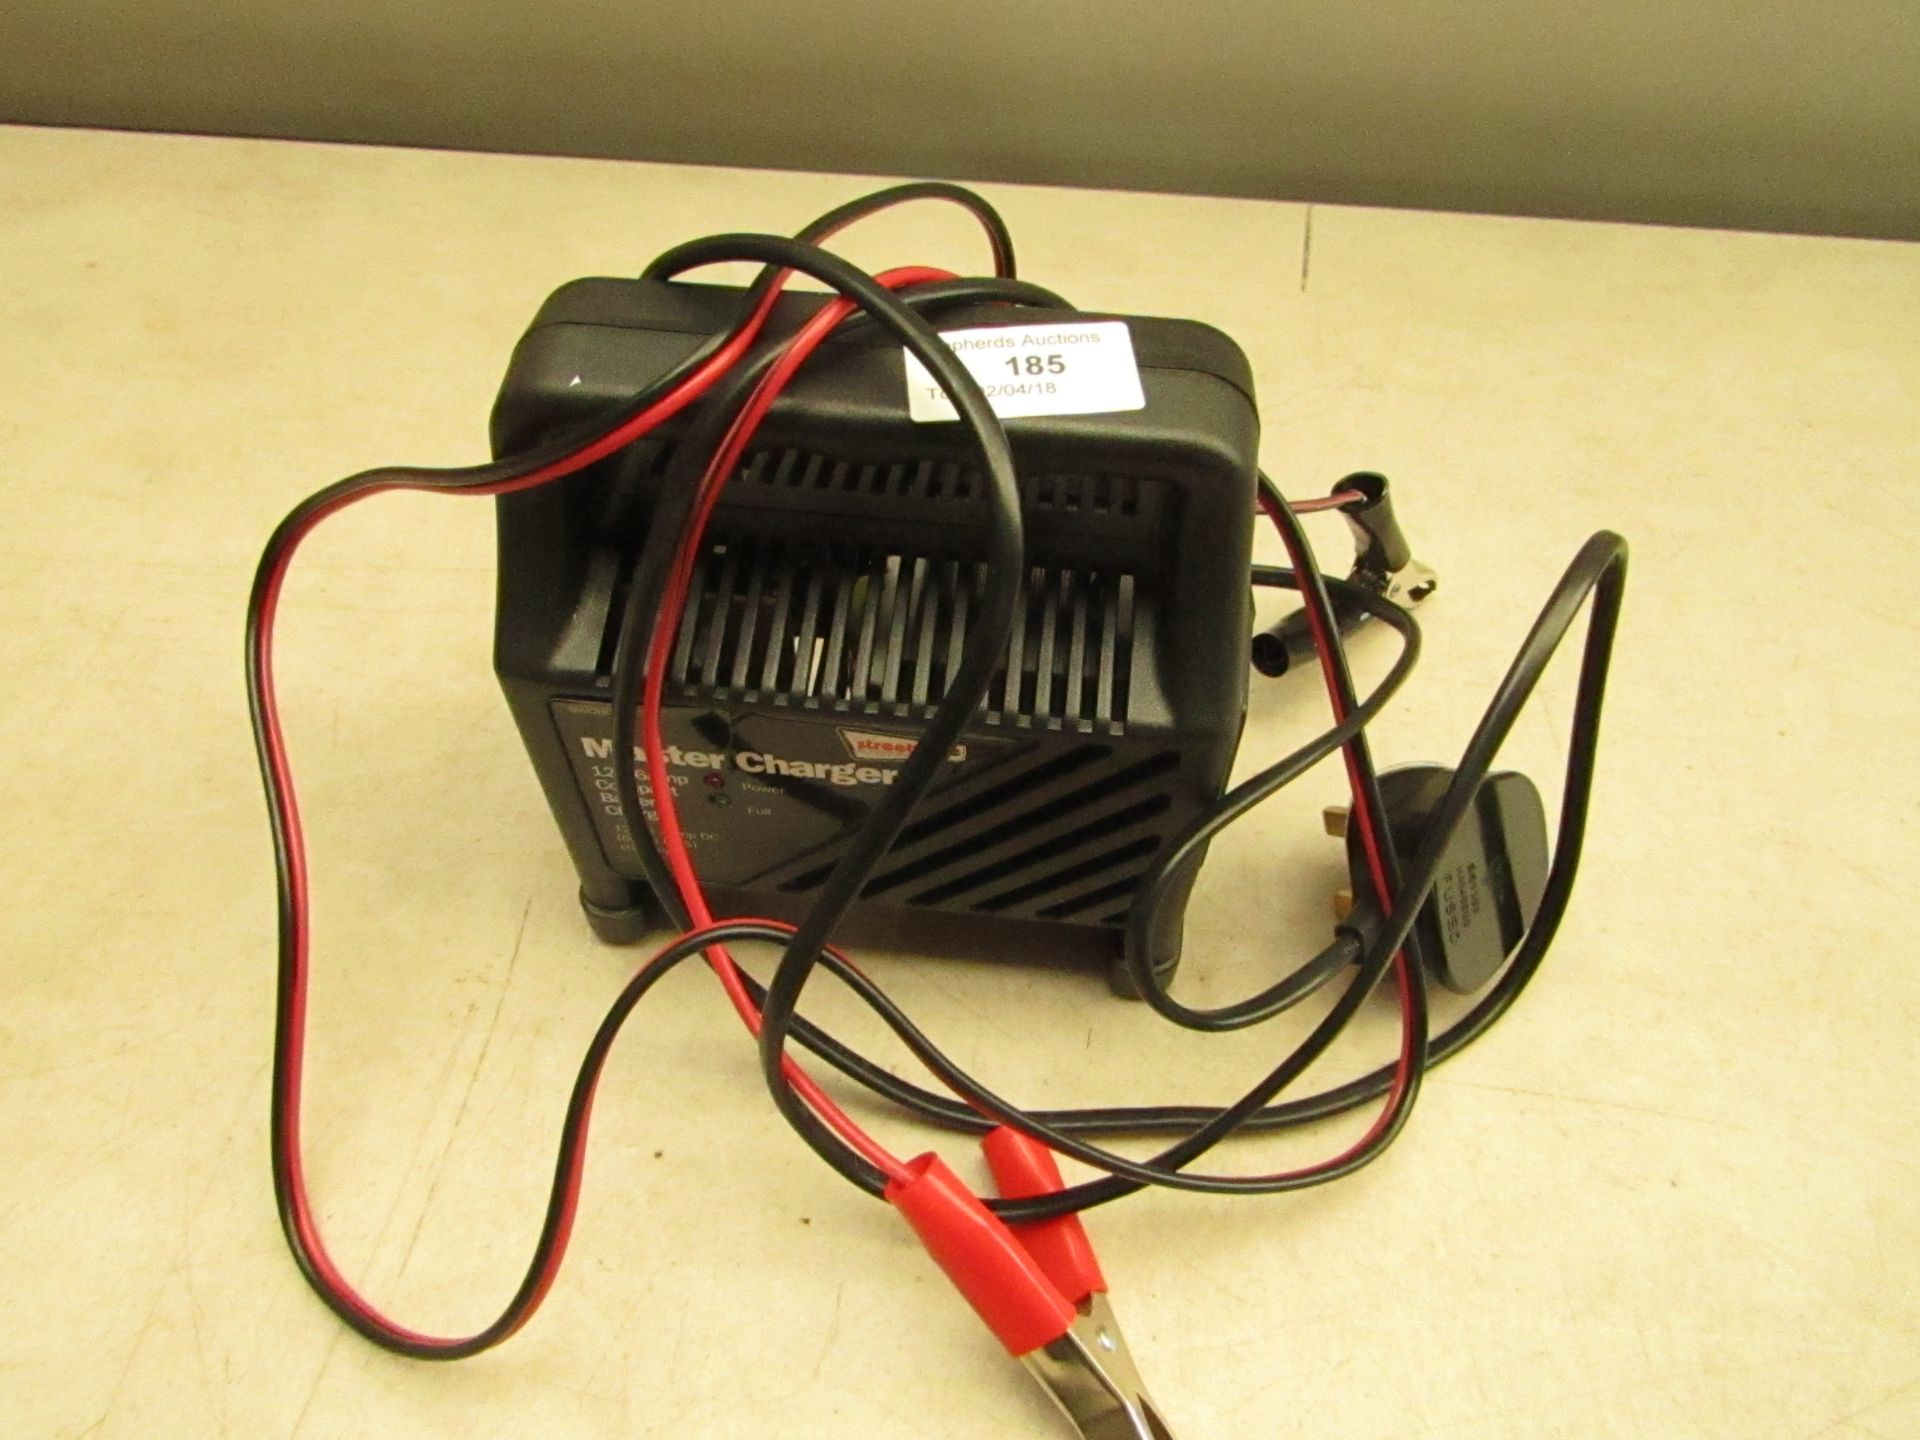 Streetwize 12v 6amp battery charger, unchecked